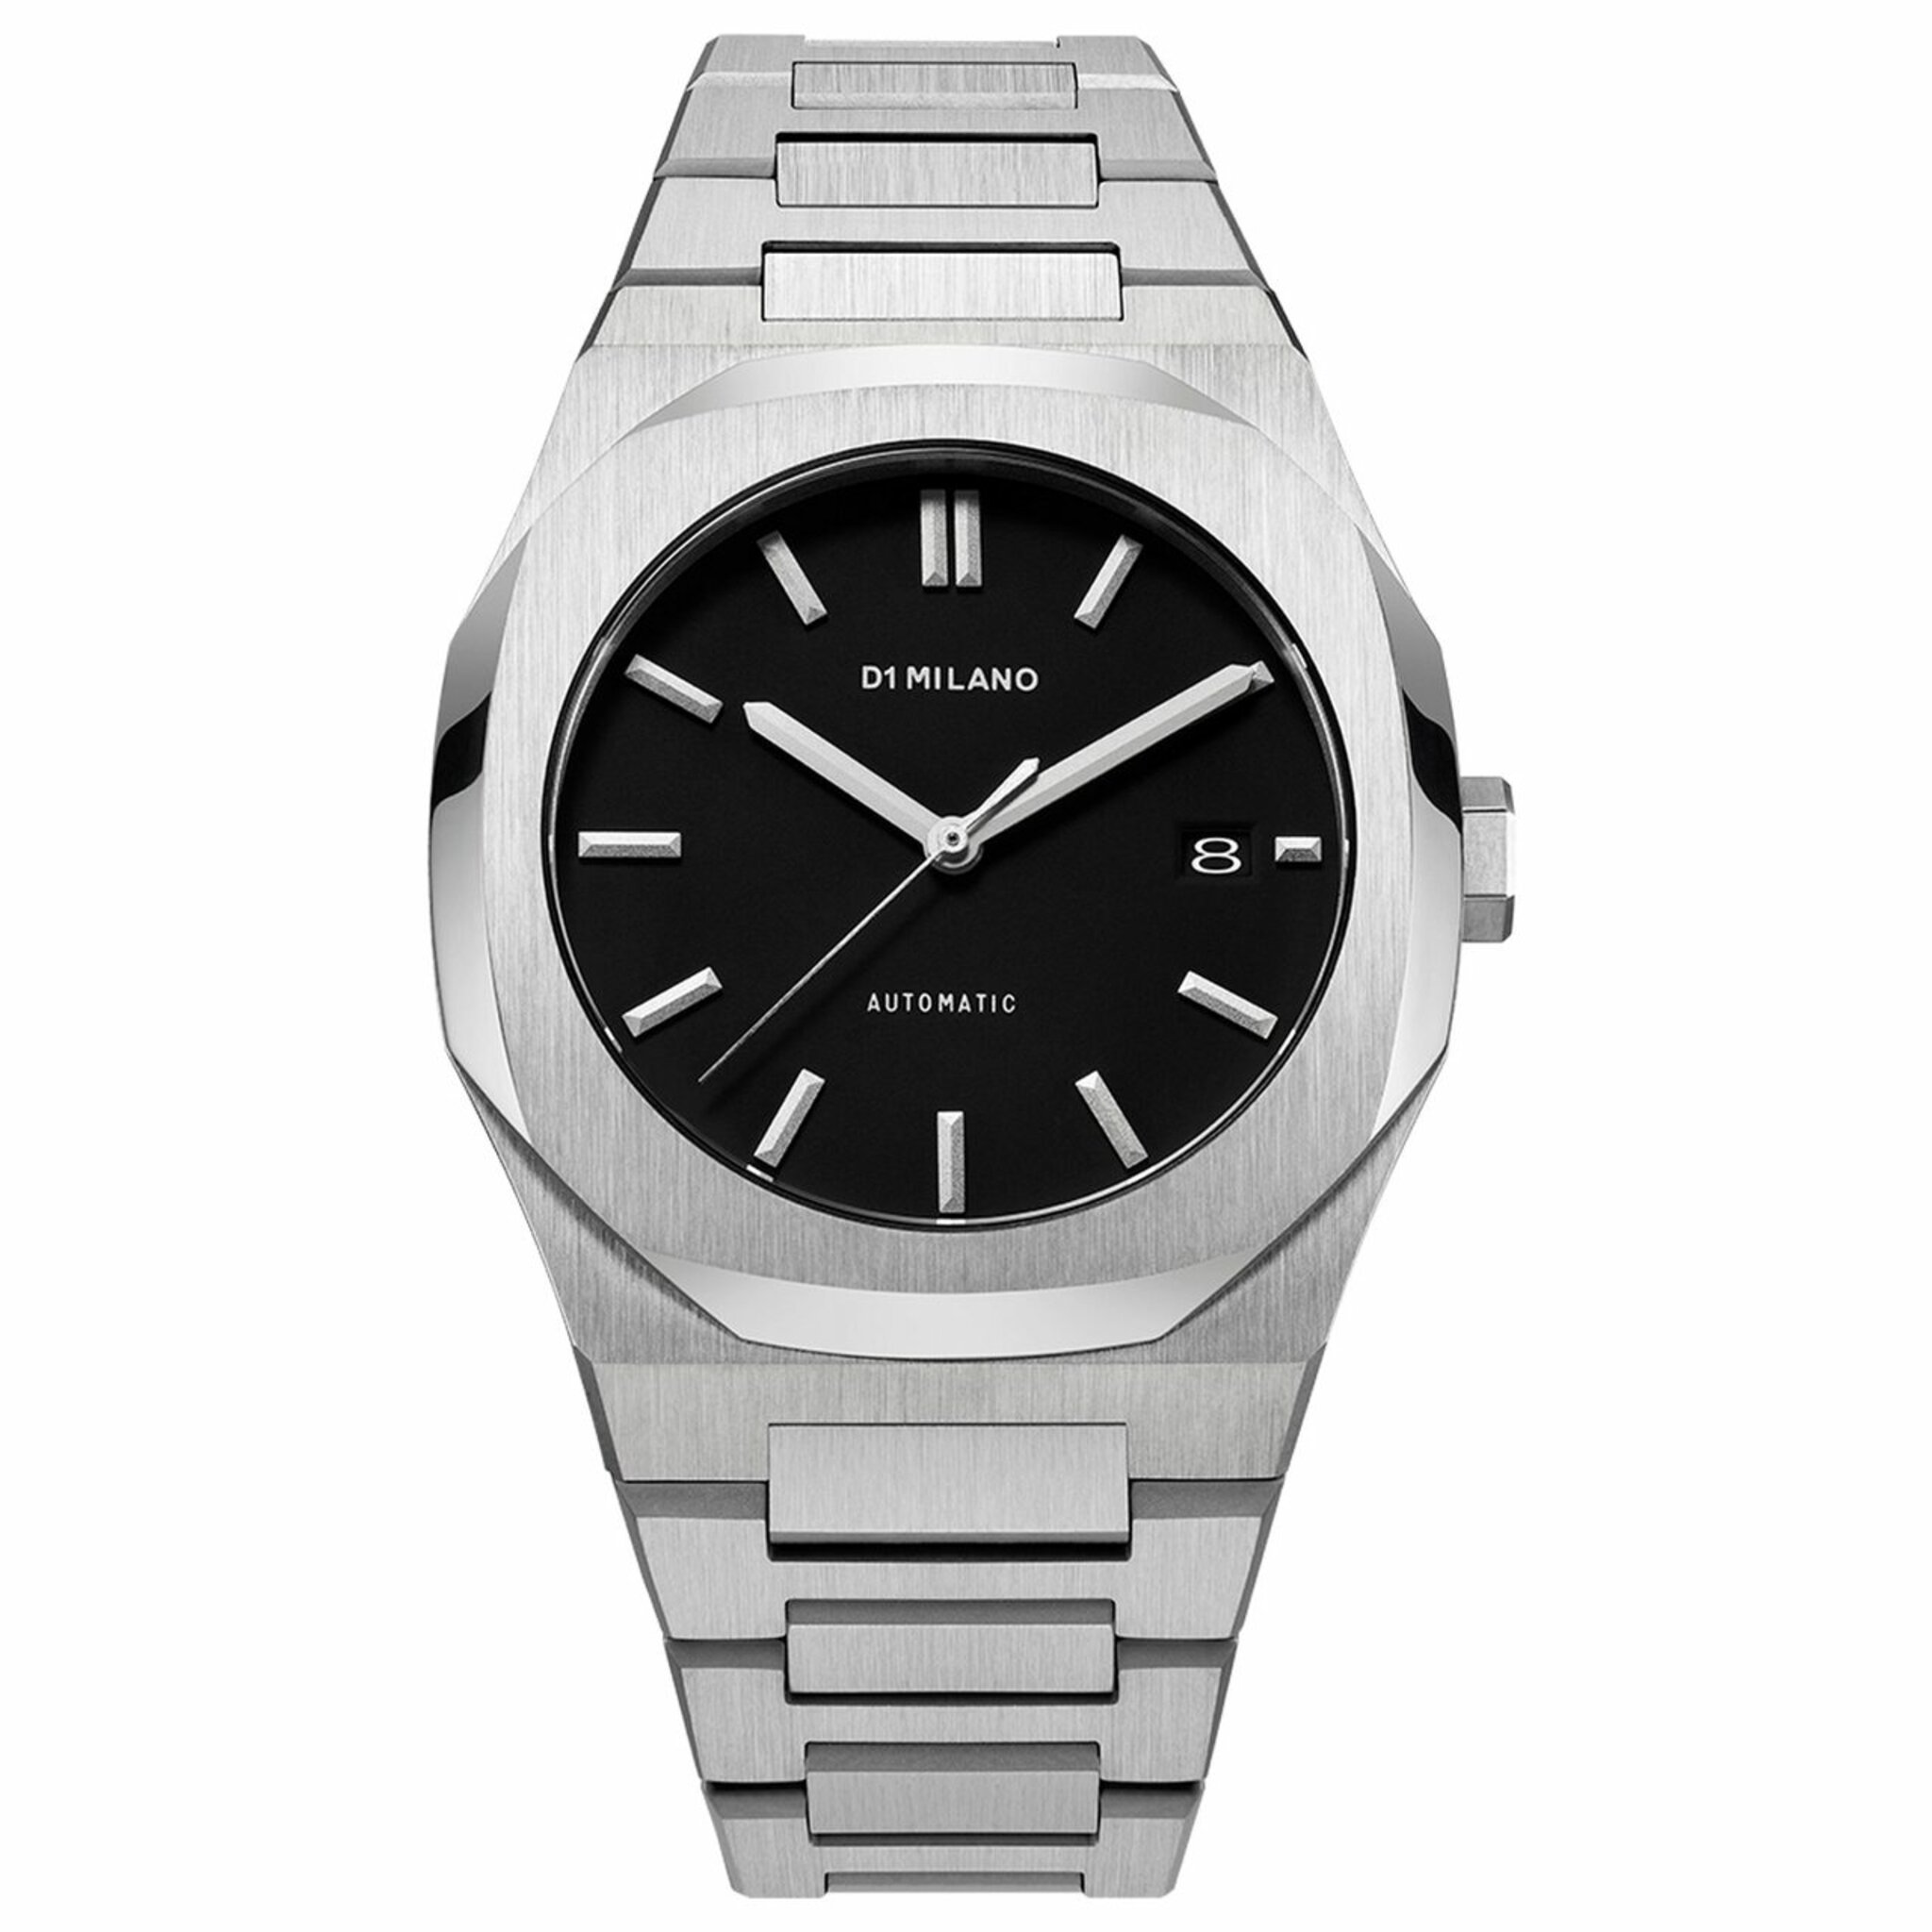 Atbj01, Automatic, 42mm, 5atm, silver